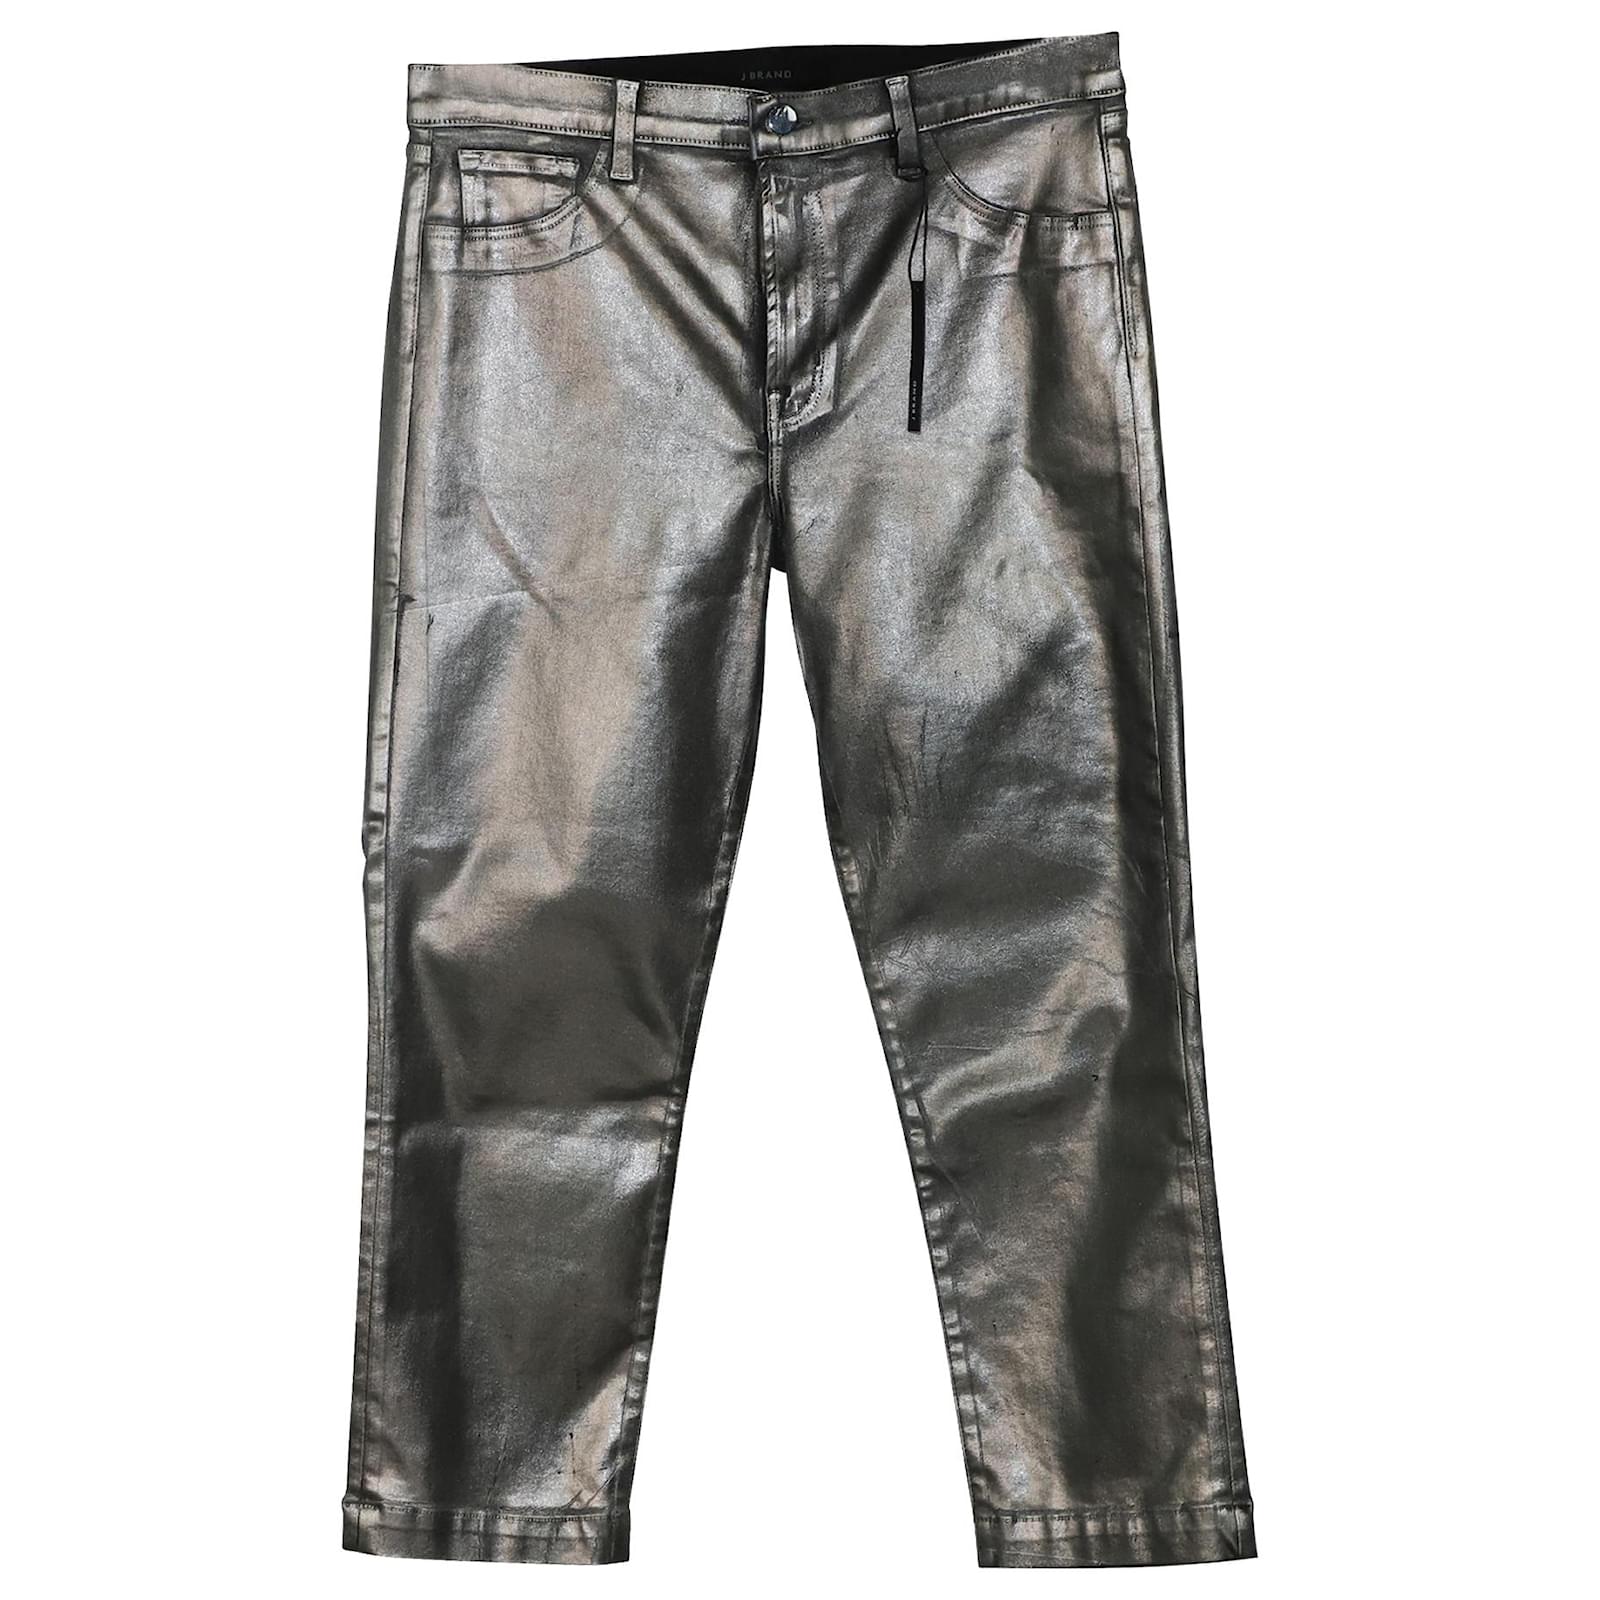 Share 134+ silver brand pants - stylex.vn